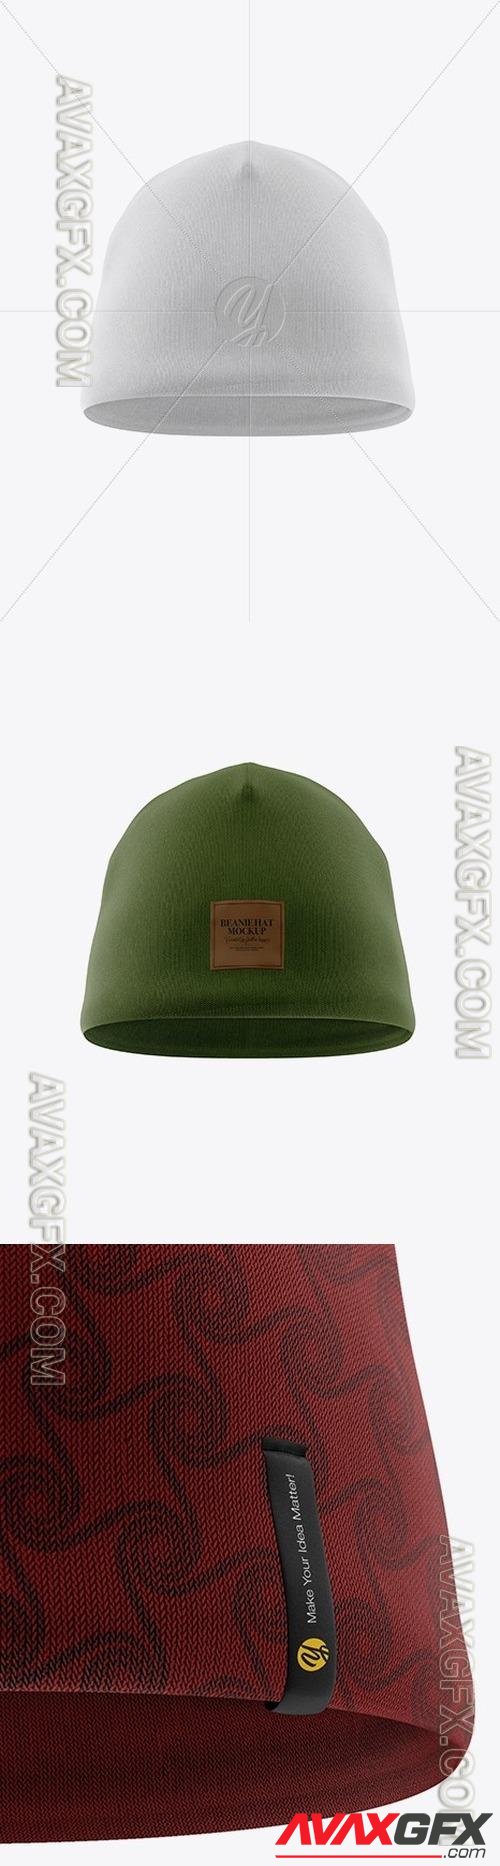 Beanie Hat Mockup - Front View 25296